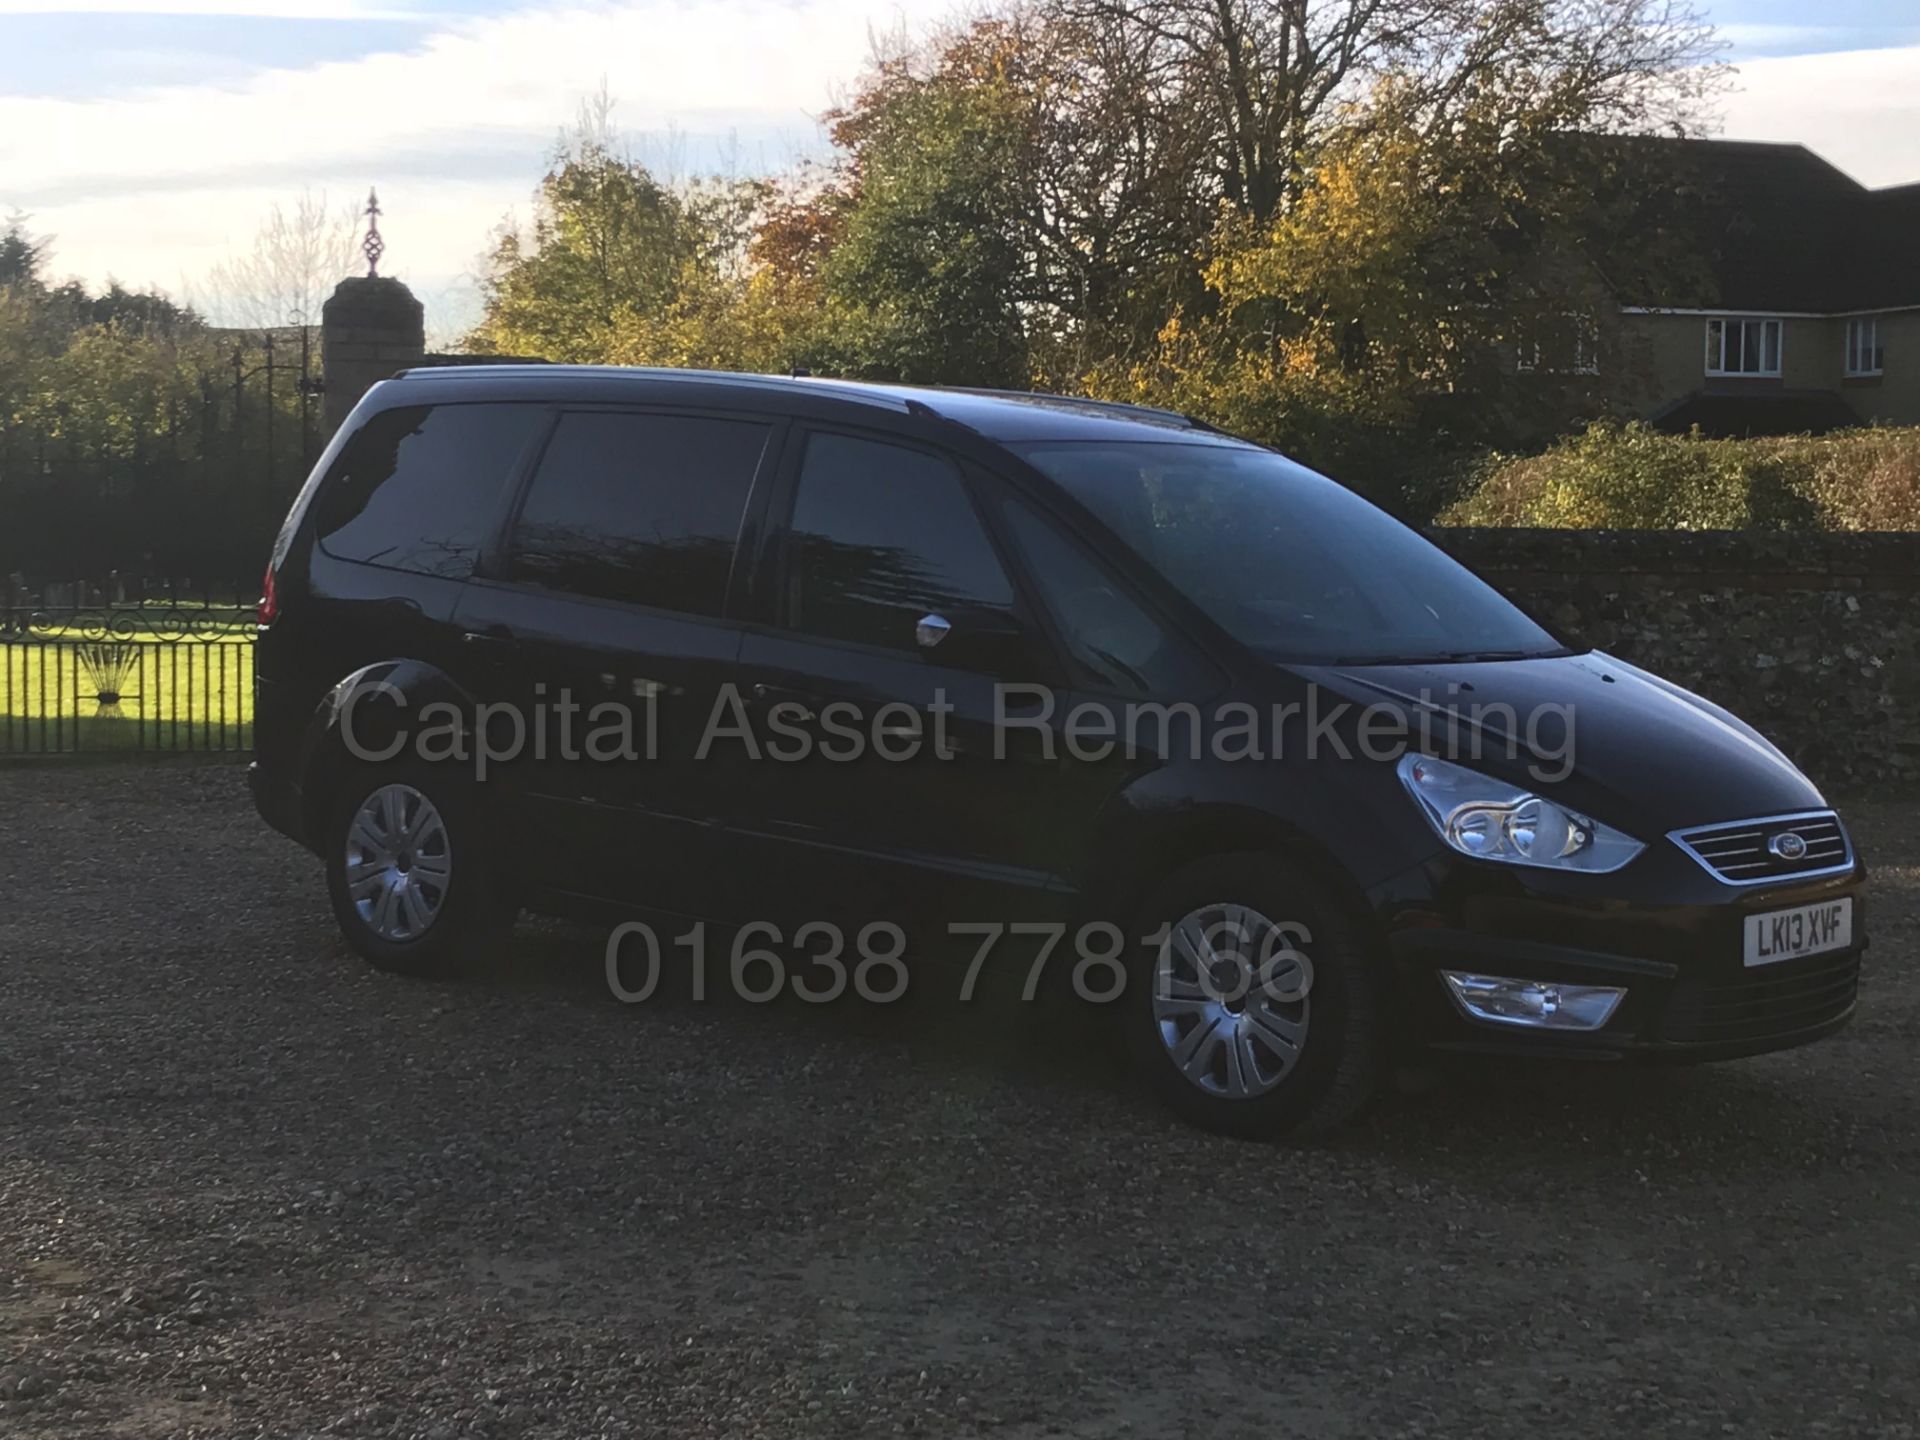 (On Sale) FORD GALAXY 'ZETEC' 7 SEATER MPV (2013) '2.0 TDCI -140 BHP' (1 OWNER) *FULL HISTORY* - Image 2 of 29